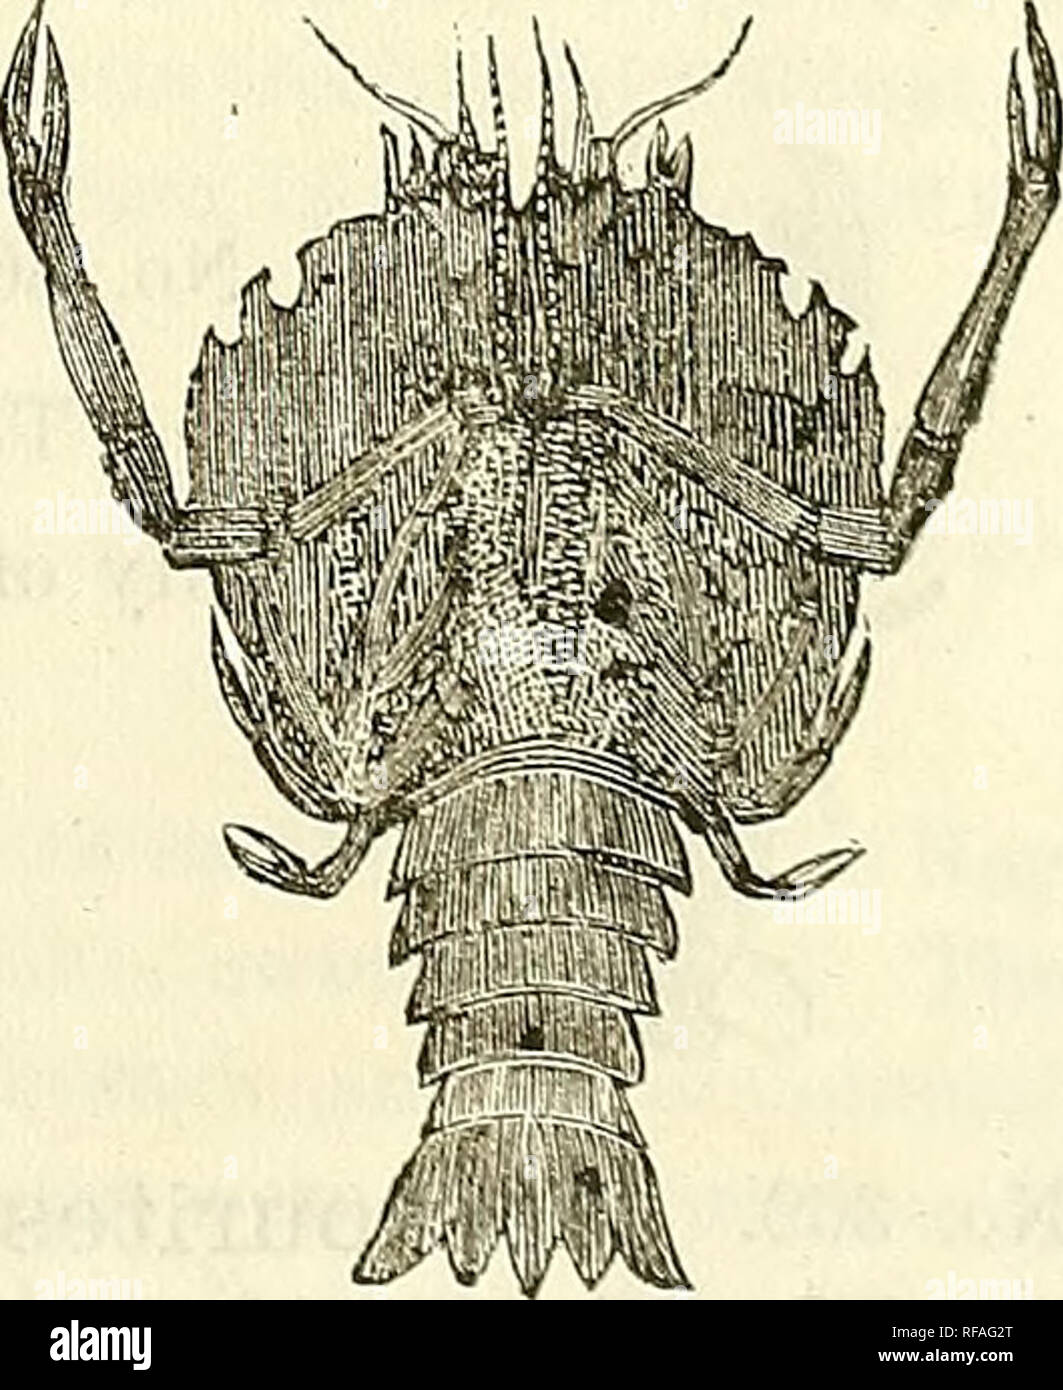 . Catalogue of casts of fossils, from the principal museums of Europe and America, with short descriptions and illustrations. Fossils. If ^^si^p^i m I 1 m This beautiful and very perfect Crustacean from the Lias of Lyme-Regis, England, was a burrowing Decapod with long monodactylous fore-limbs armed with spines. The cephalothorax was one-third longer than deep, and shorter than the abdomen; the rostrum was prominent, curving upwards, and had a double row of conical, slightly curved spines ; the tail was long, and the lobes were broad and spinous. Size, 10x5. Price, $1.75. No. 353. Enoploclytea Stock Photo